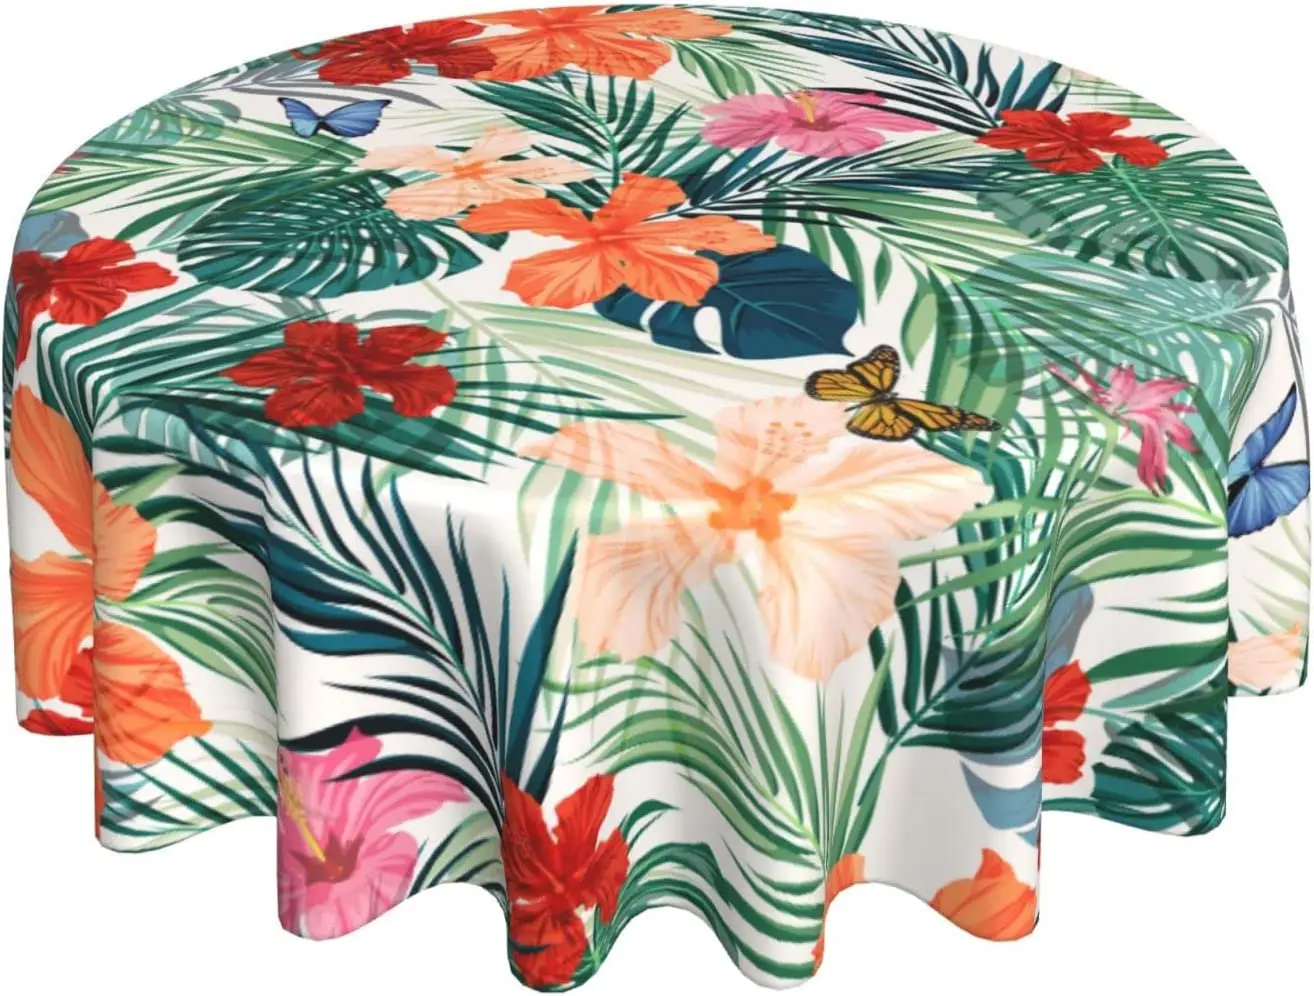 

Hawaiian Palm Tree Round Tablecloth 60 Inch Reusable Wipeable Waterproof Tropical Hibiscus Flowers Table Cloth Wrinkle Resistant